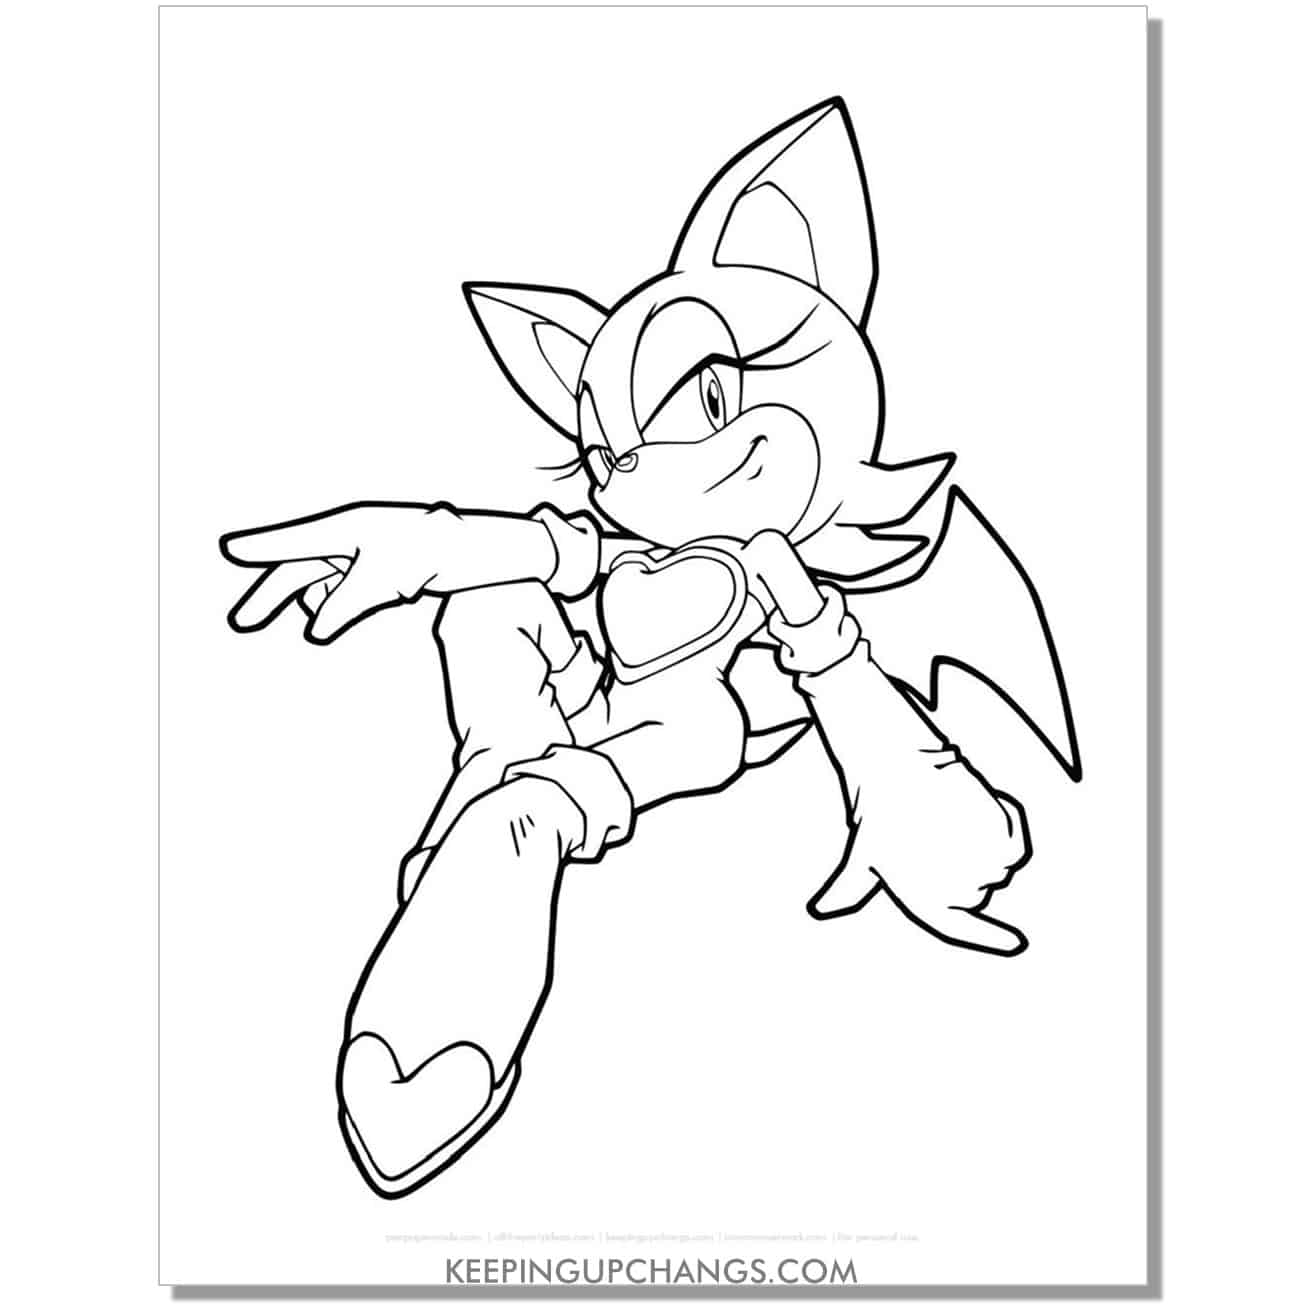 rouge sitting sonic coloring page.